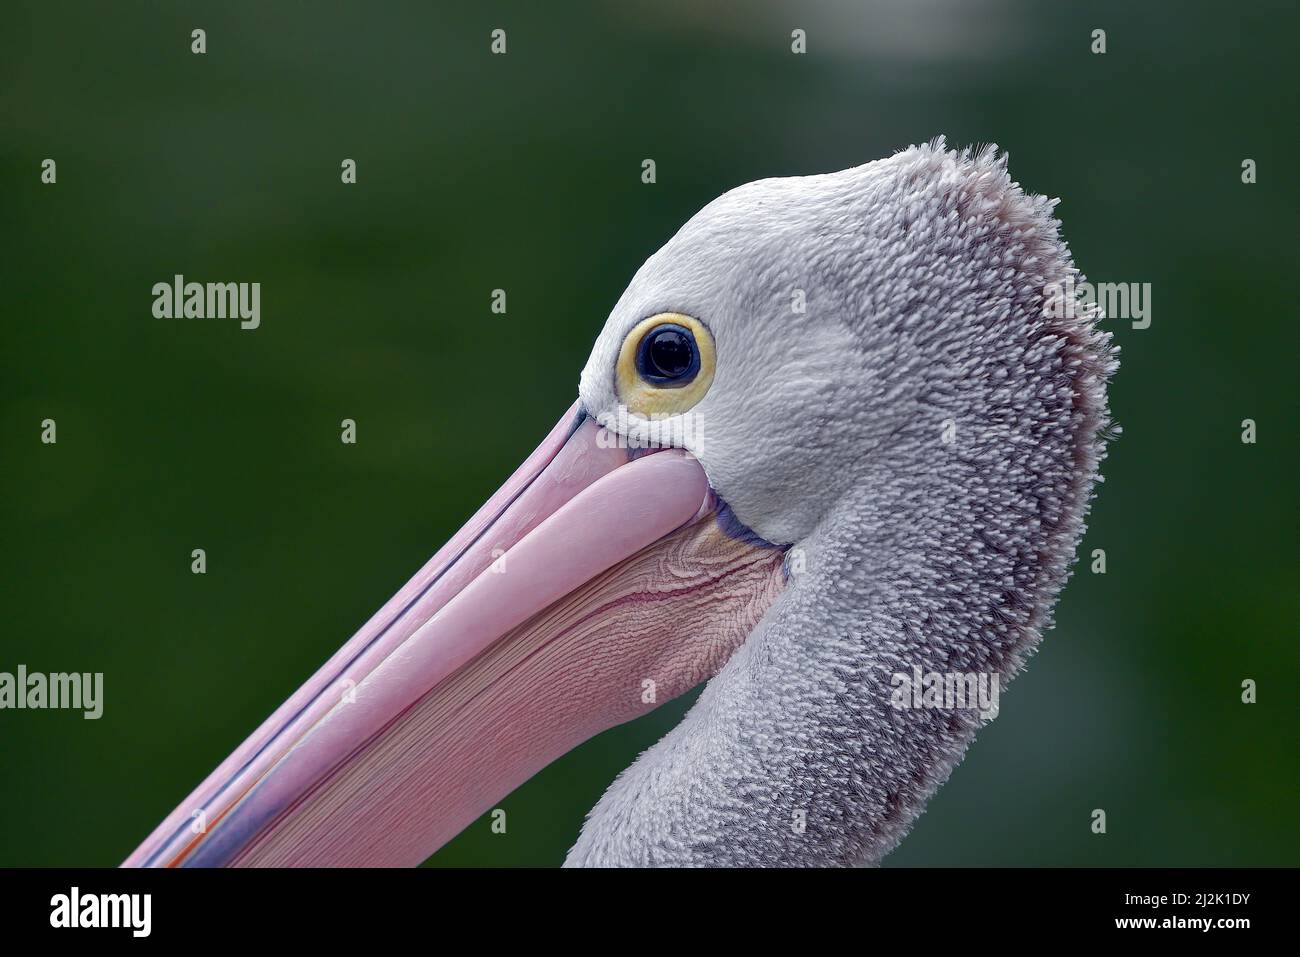 Close-up of an Australian pelican, Indonesia Stock Photo